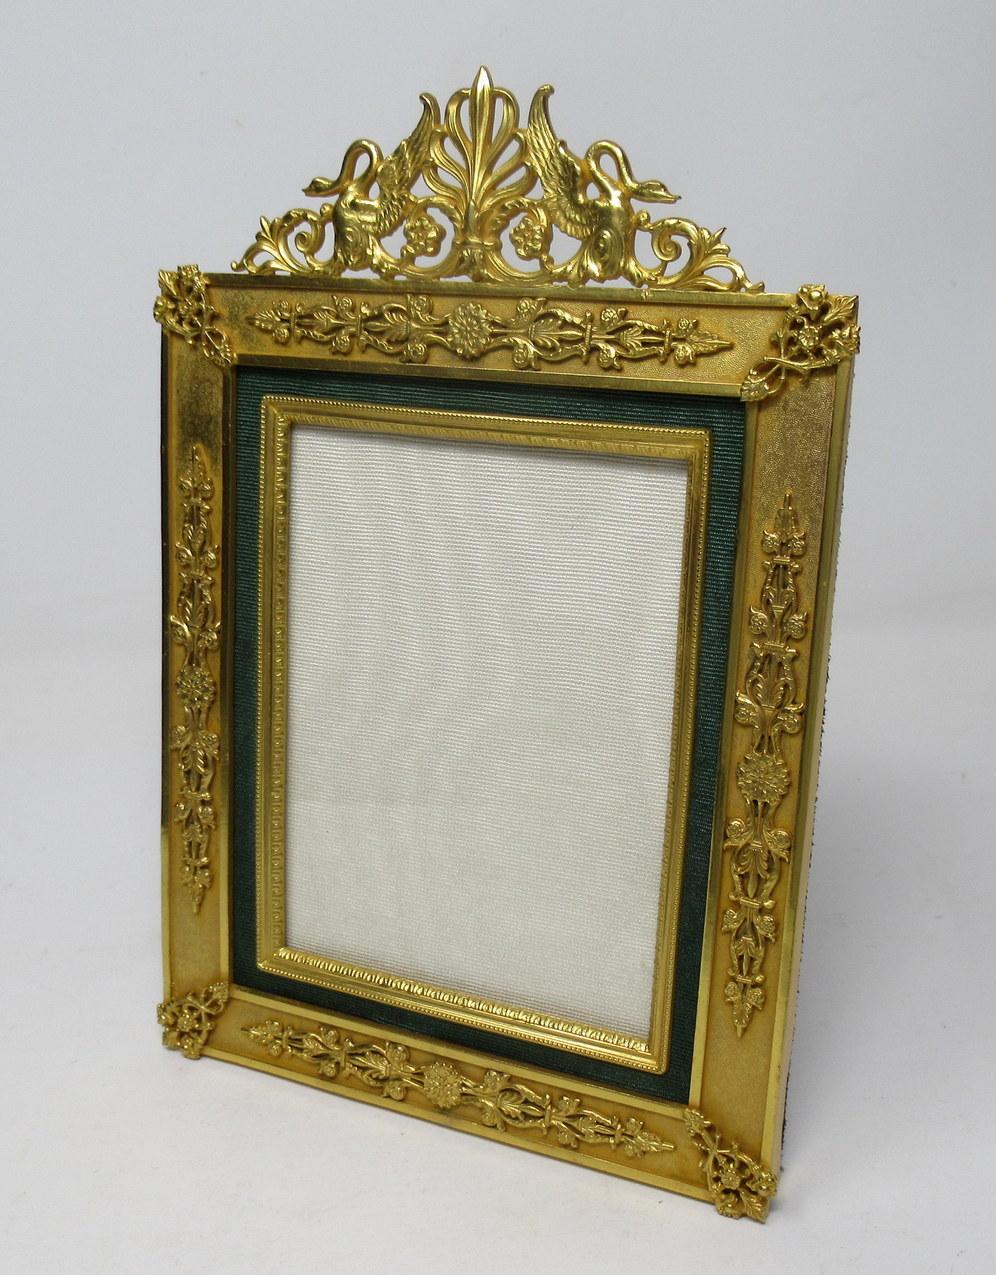 A stunning French Ormolu standing photo frame of medium proportions, mid-late 19th century. 

The rectangular shaped highly decorative ormolu cushioned style frame enclosing a single portrait shape photo inset surmounted with a very ornate applied